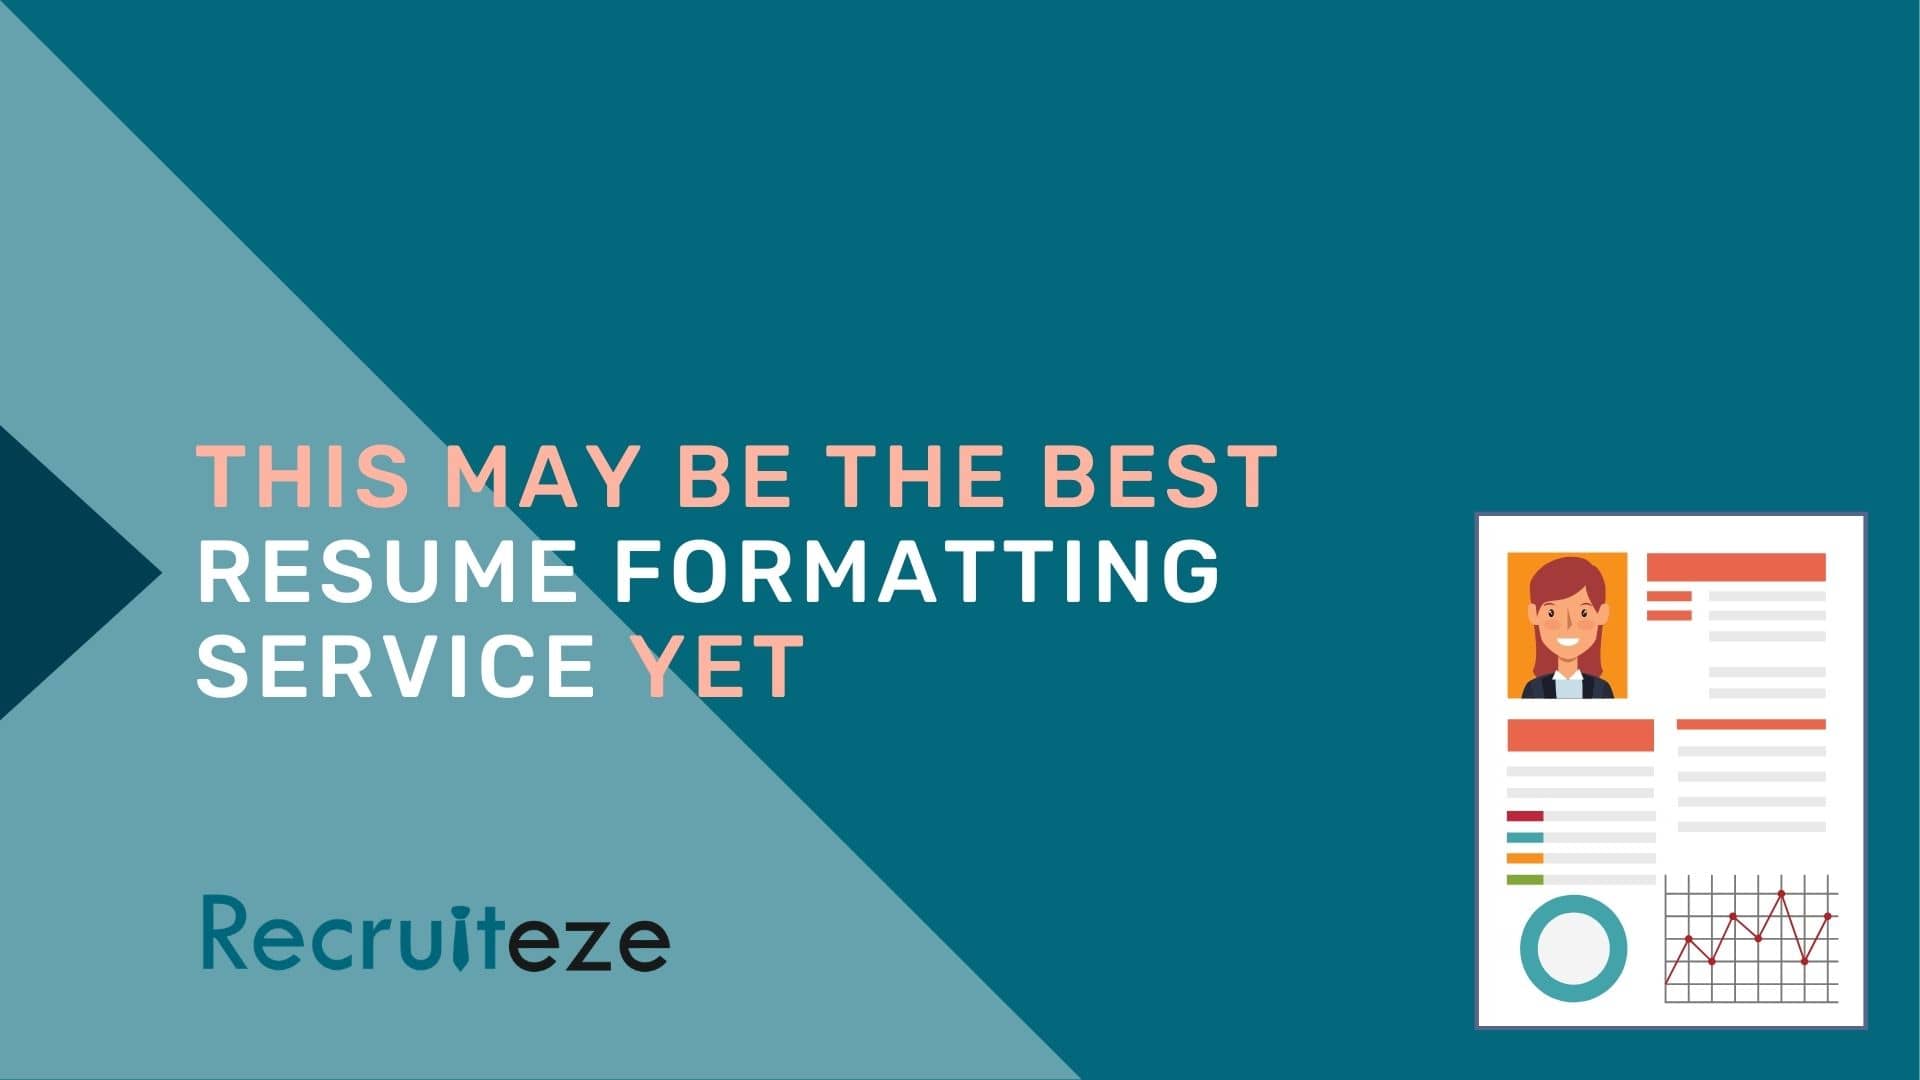 This may be the best resume formatting service yet - Recruiteze featured image